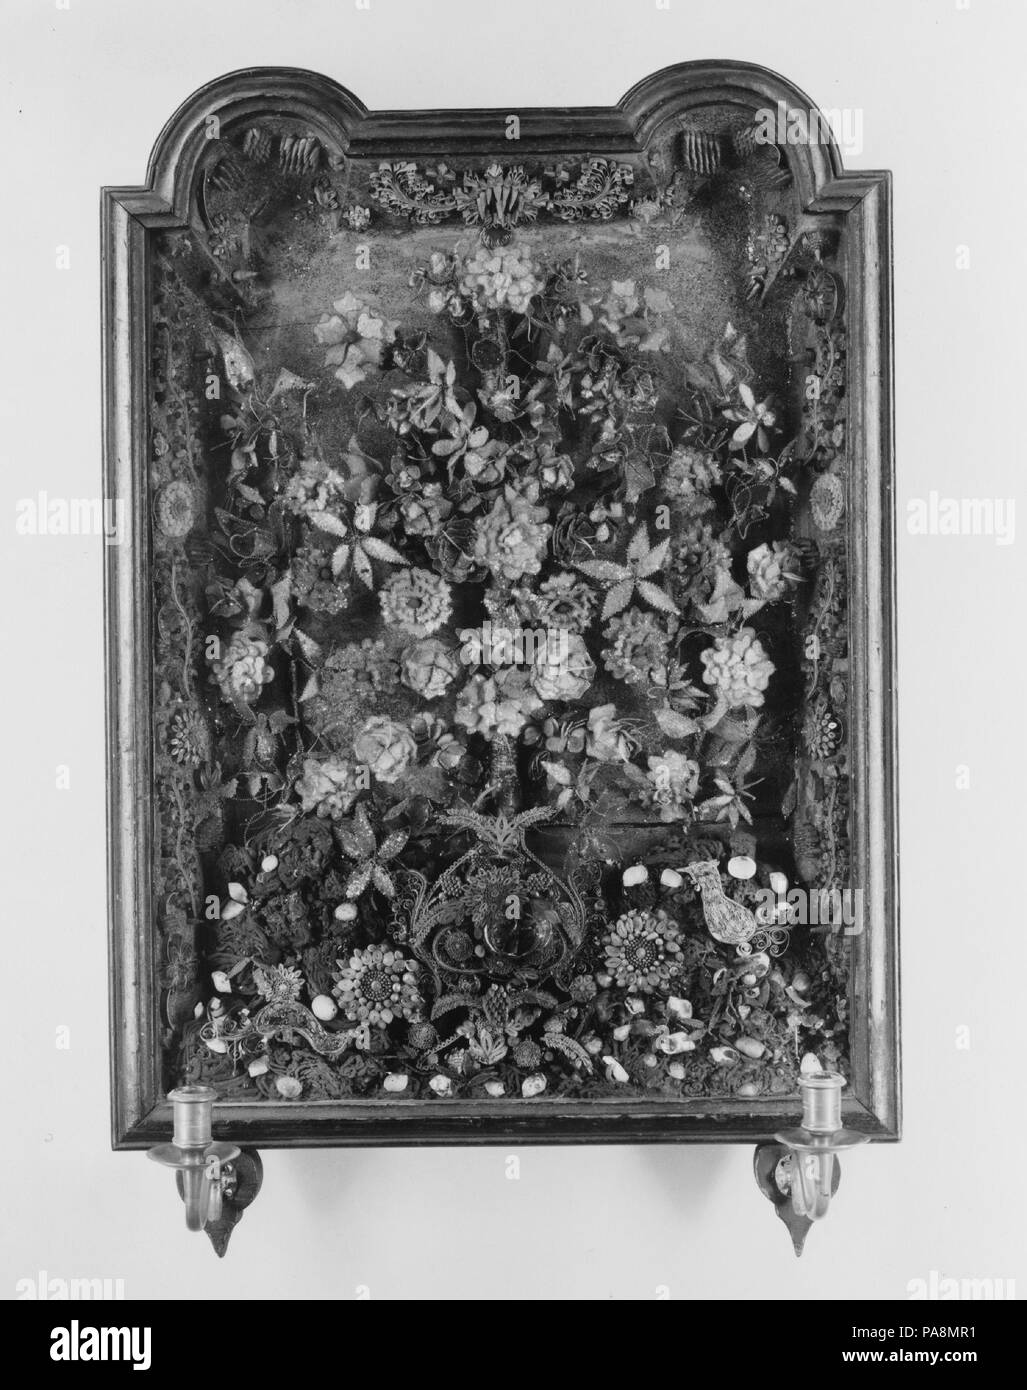 Quillwork Sconce. Dimensions: 32 x 20 3/4 in. (81.3 x 52.7 cm). Date: 1720-49. Museum: Metropolitan Museum of Art, New York, USA. Stock Photo